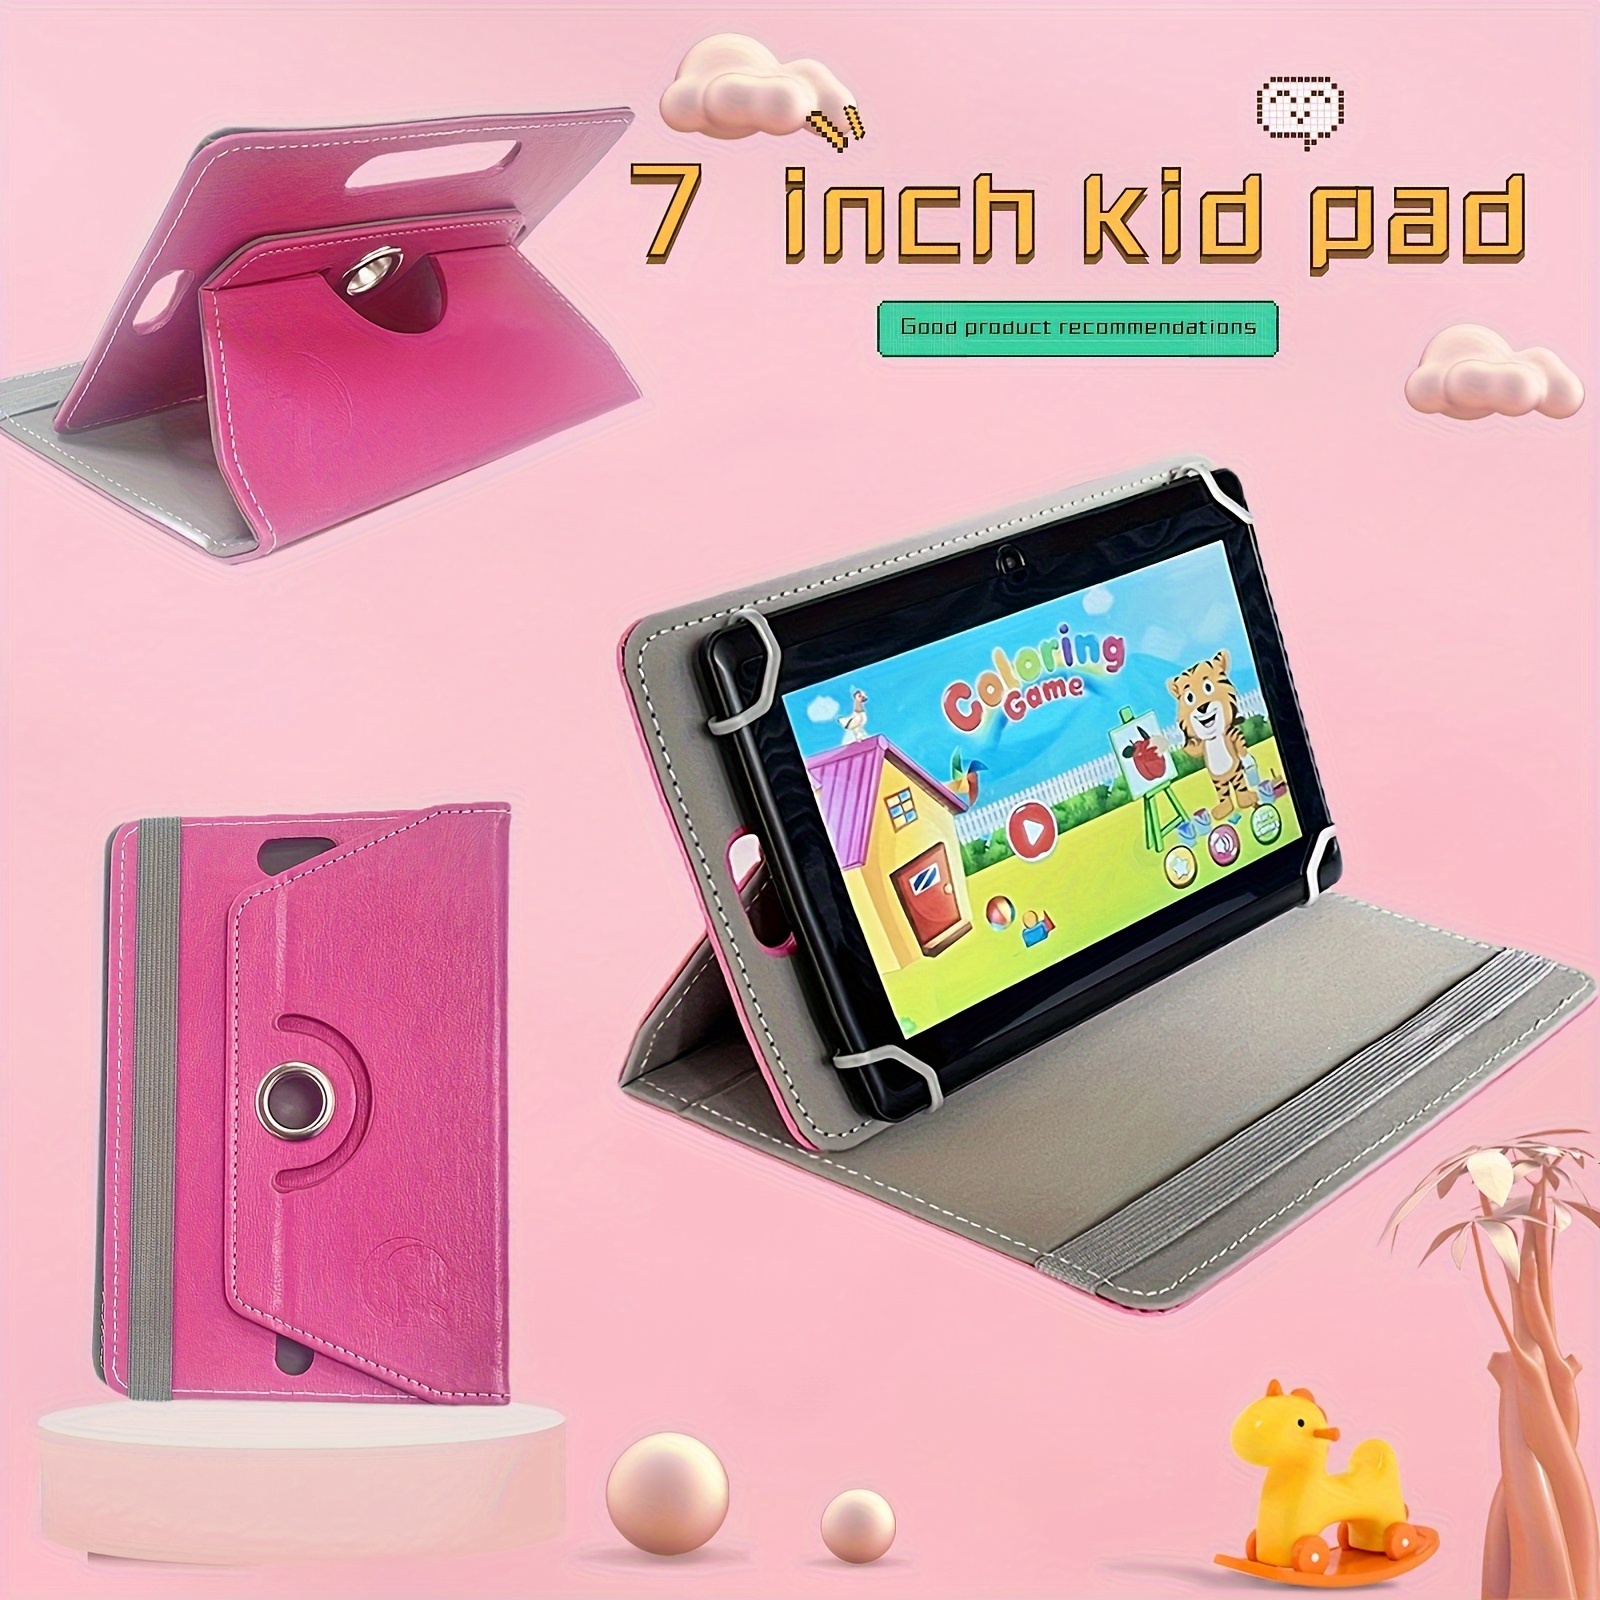 new gift kids tablet study pad 7 inch educational toy safety kids contents eye protect hd screen 2 cameras parental lock 360 rotation education toy usb supply